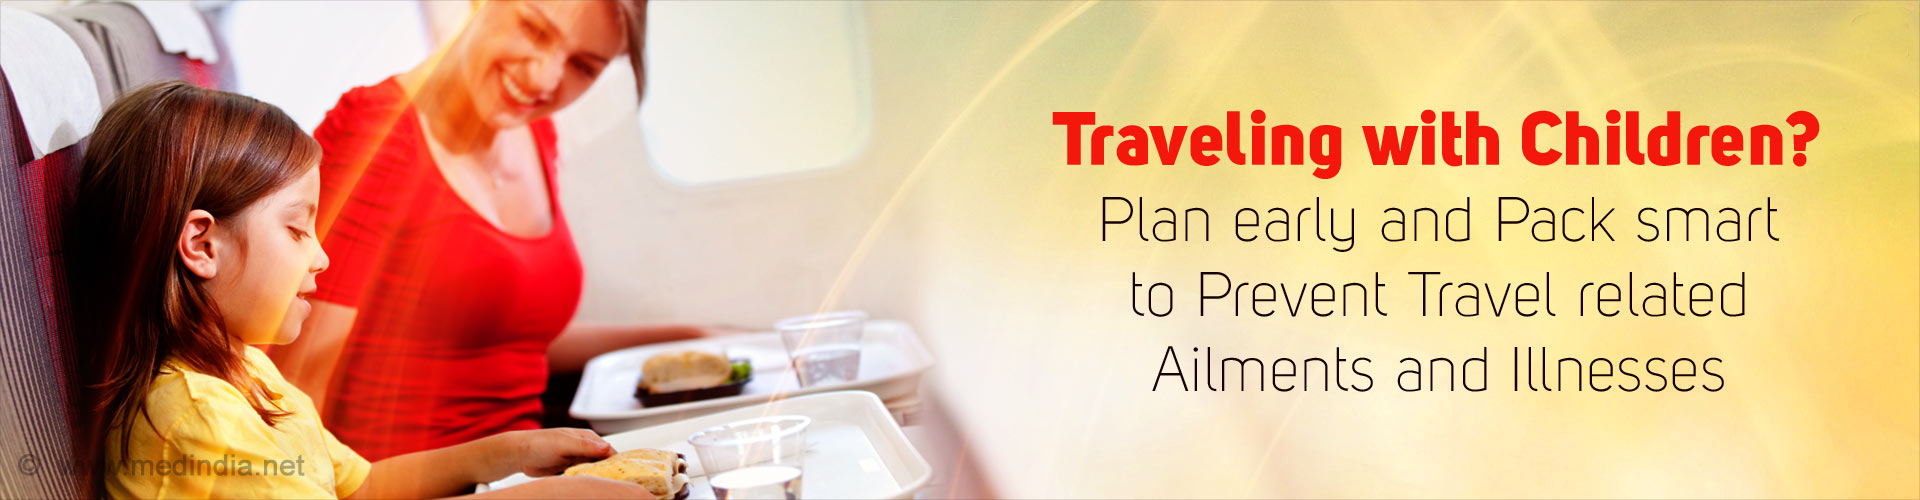 Traveling with Children? Plan early and Pack smart to Prevent Travel related Ailments and Illnesses